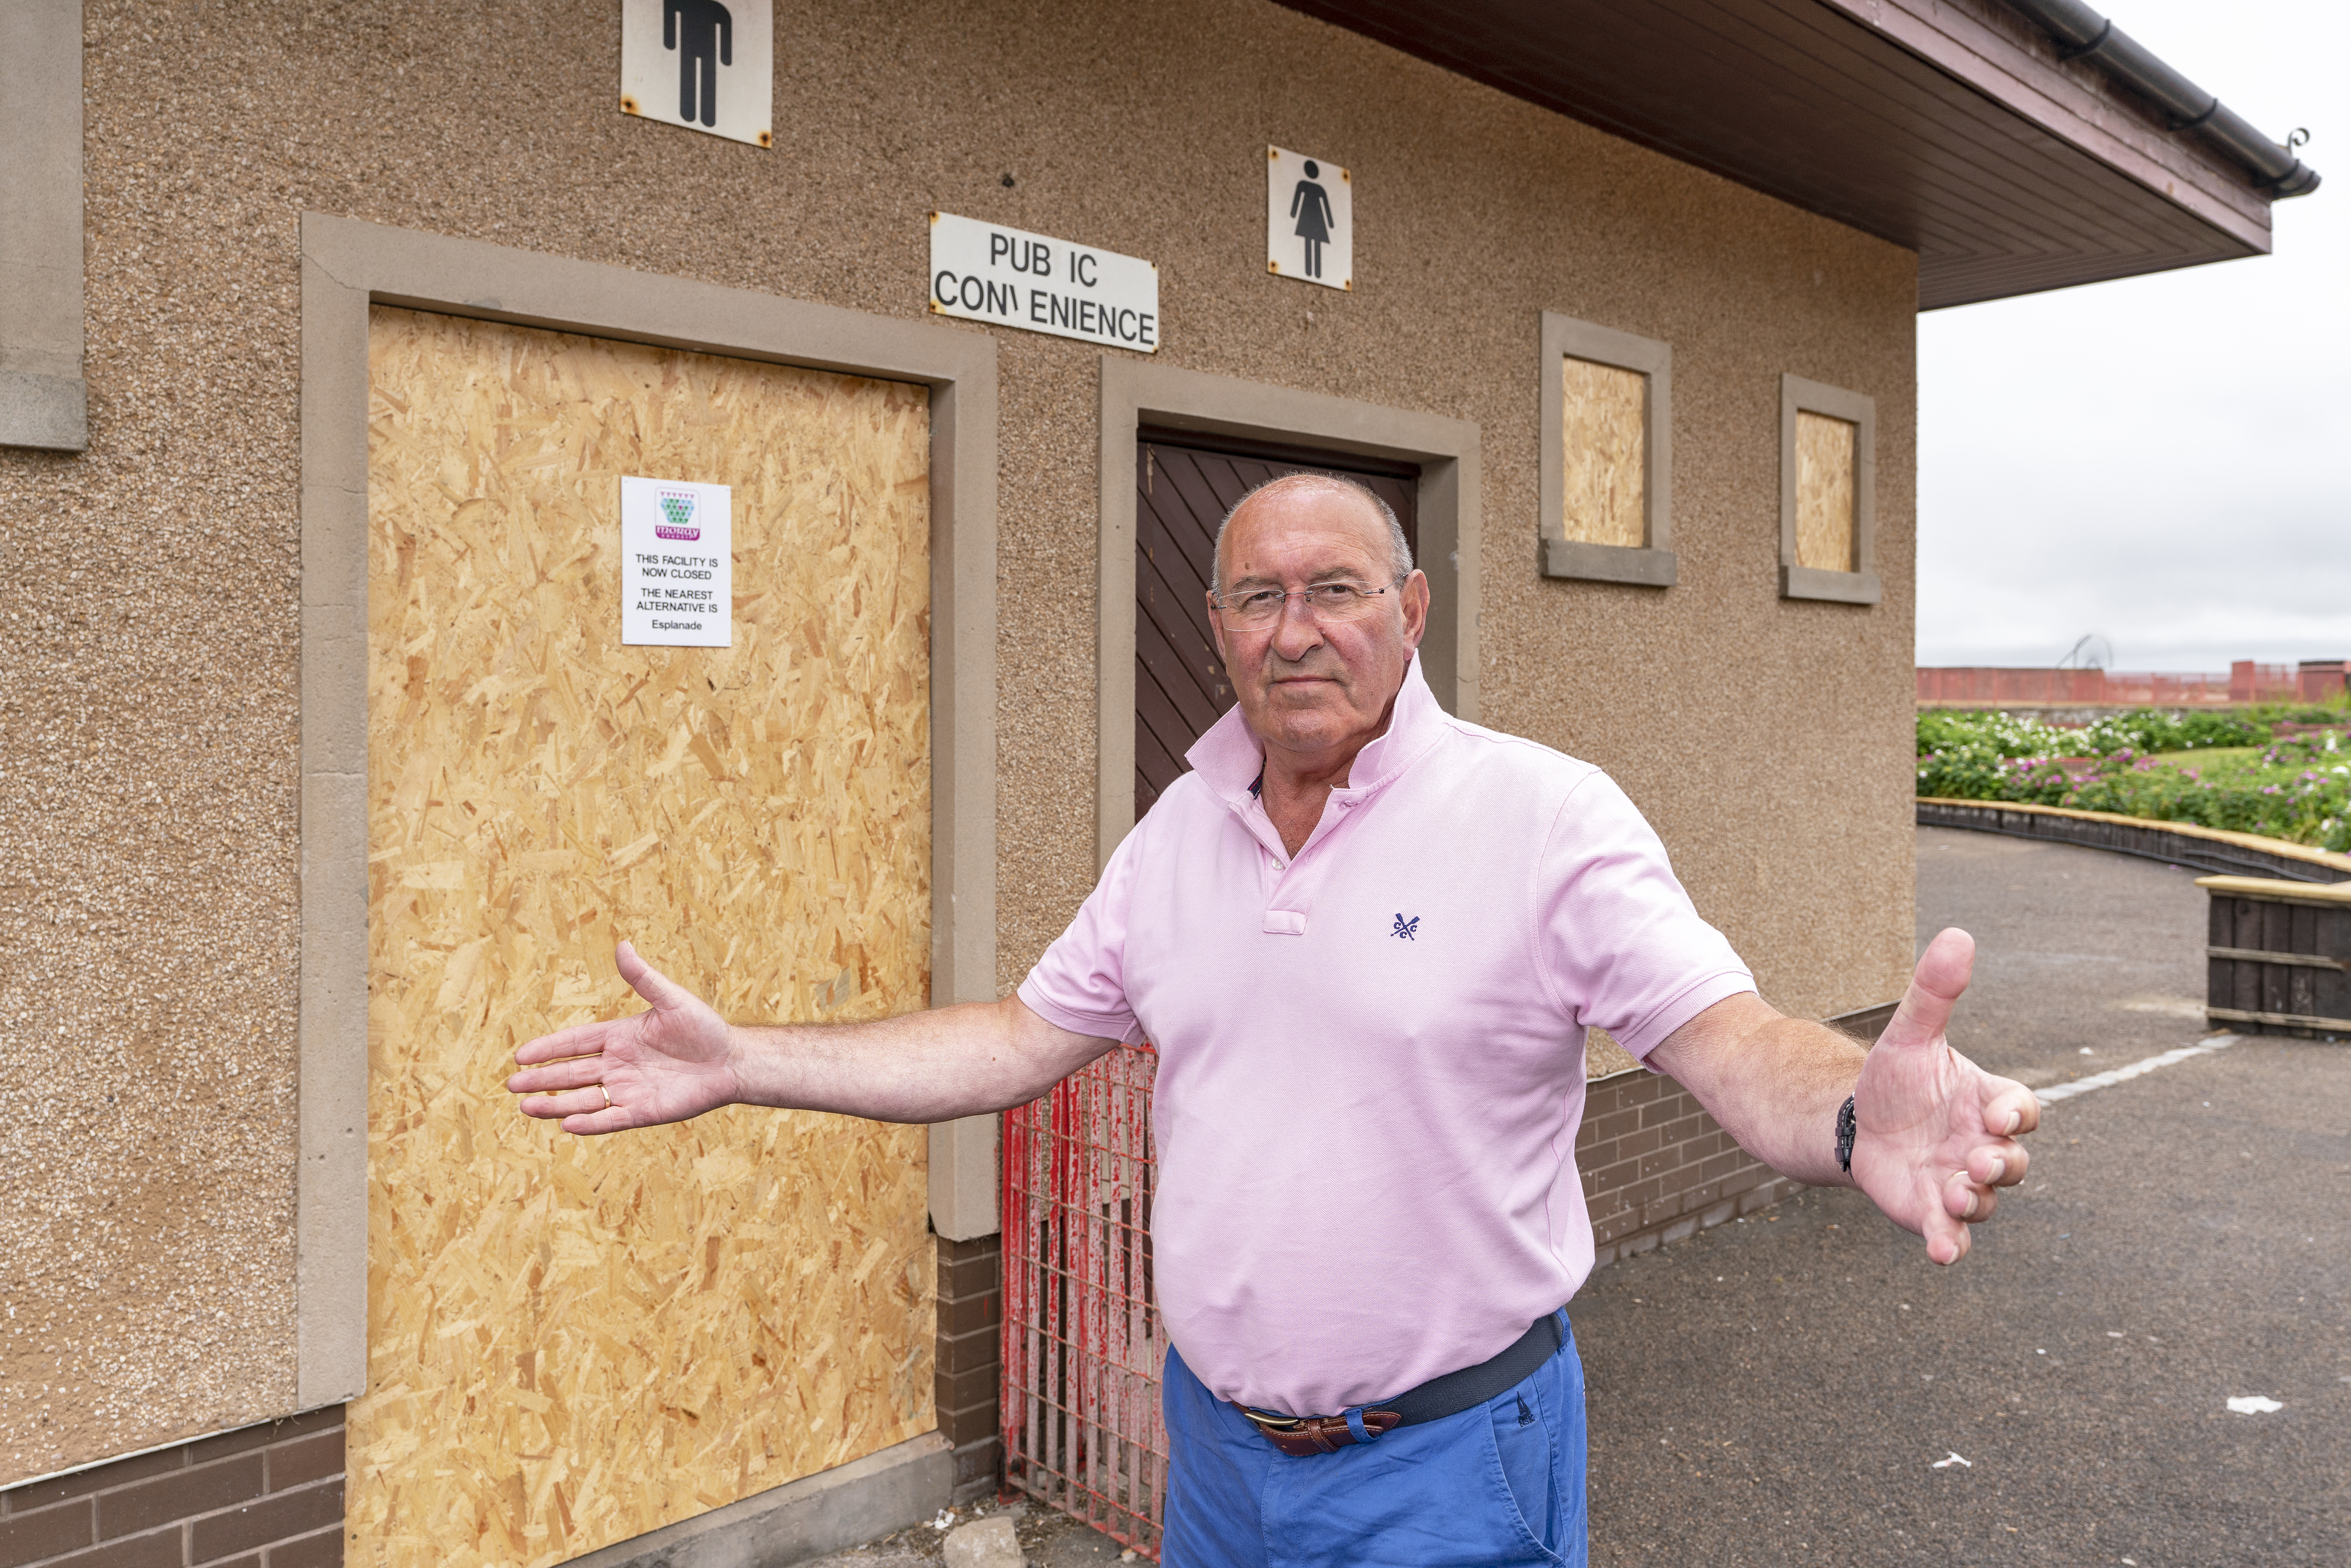 This is the closed public toilets at Station Park Lossiemouth, Moray along with chairman of Lossiemouth Community Council, Mike Mullholland on Wednesday 11 July 2018. Photographed by Brian Smith T/A Jasperimage ©.